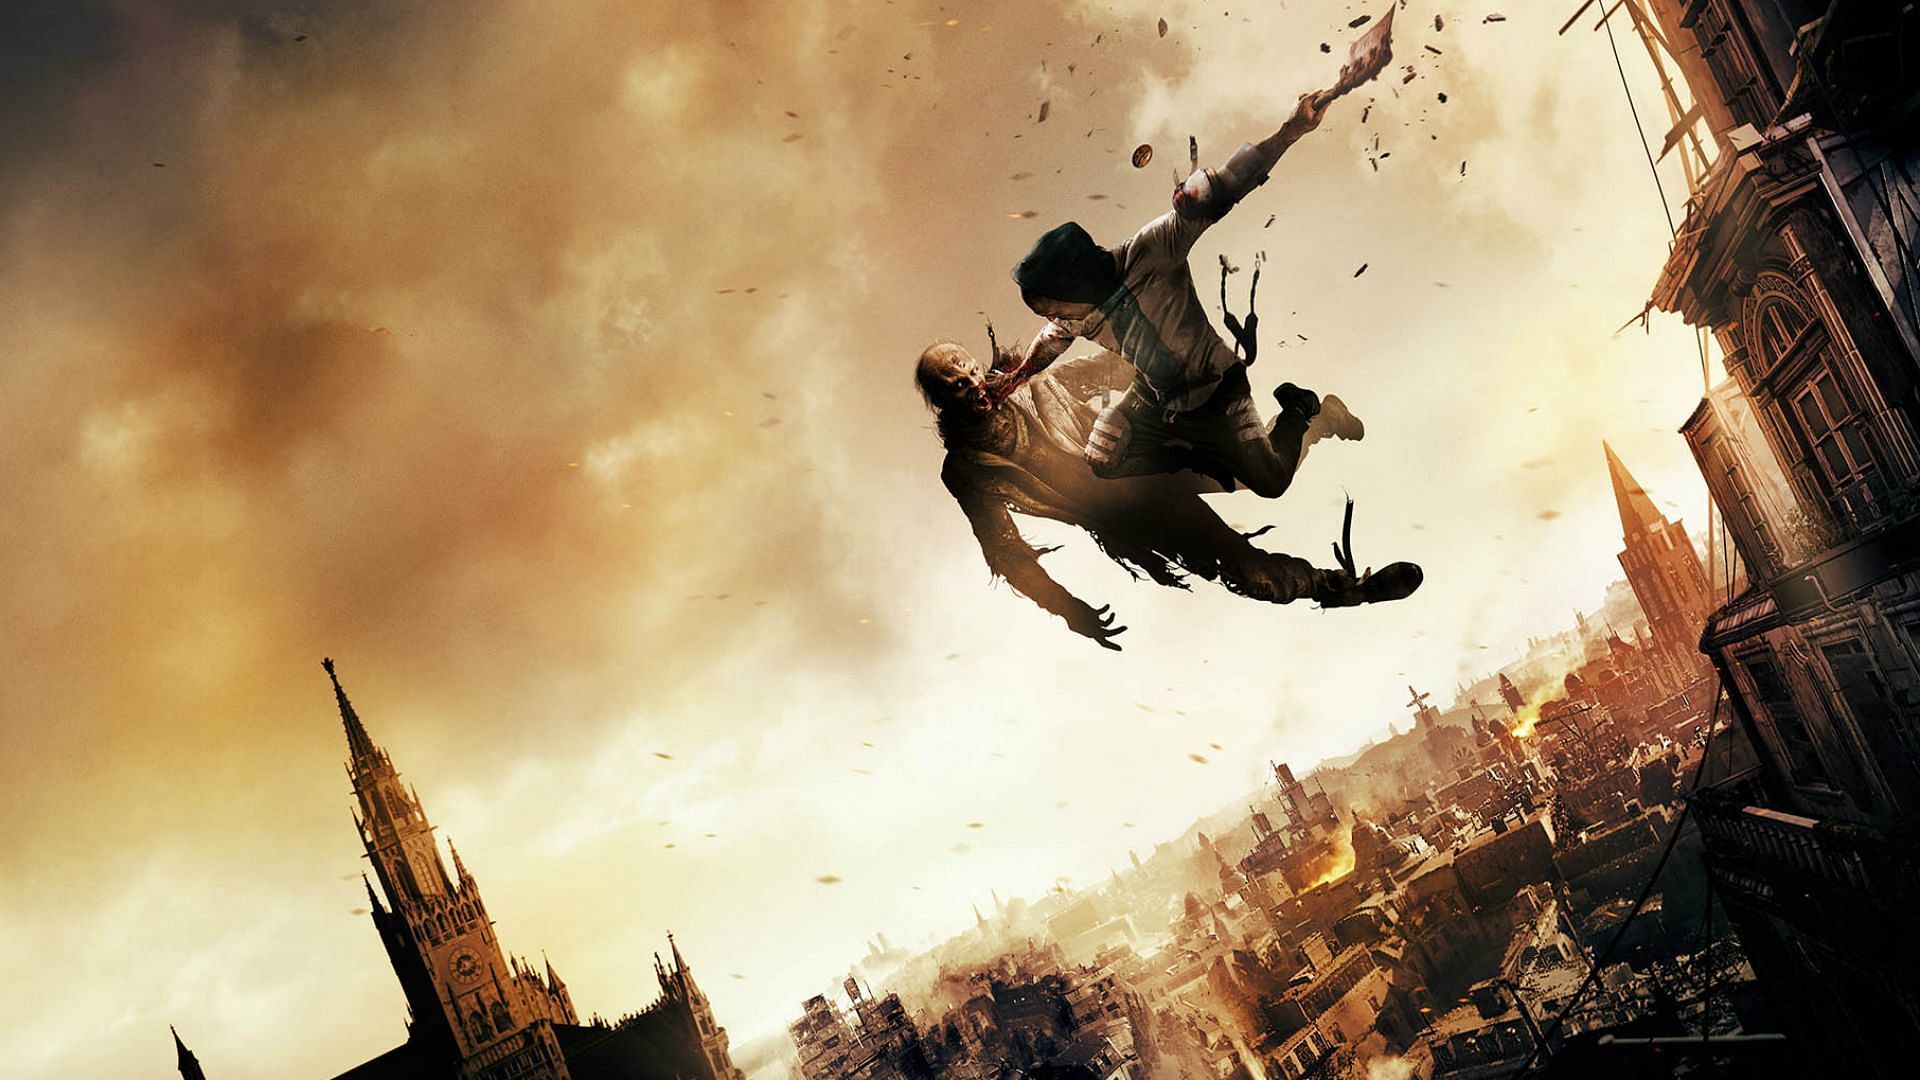 Dying Light 2 gets another trailer at The Game Awards 2021 (Image via Techland)